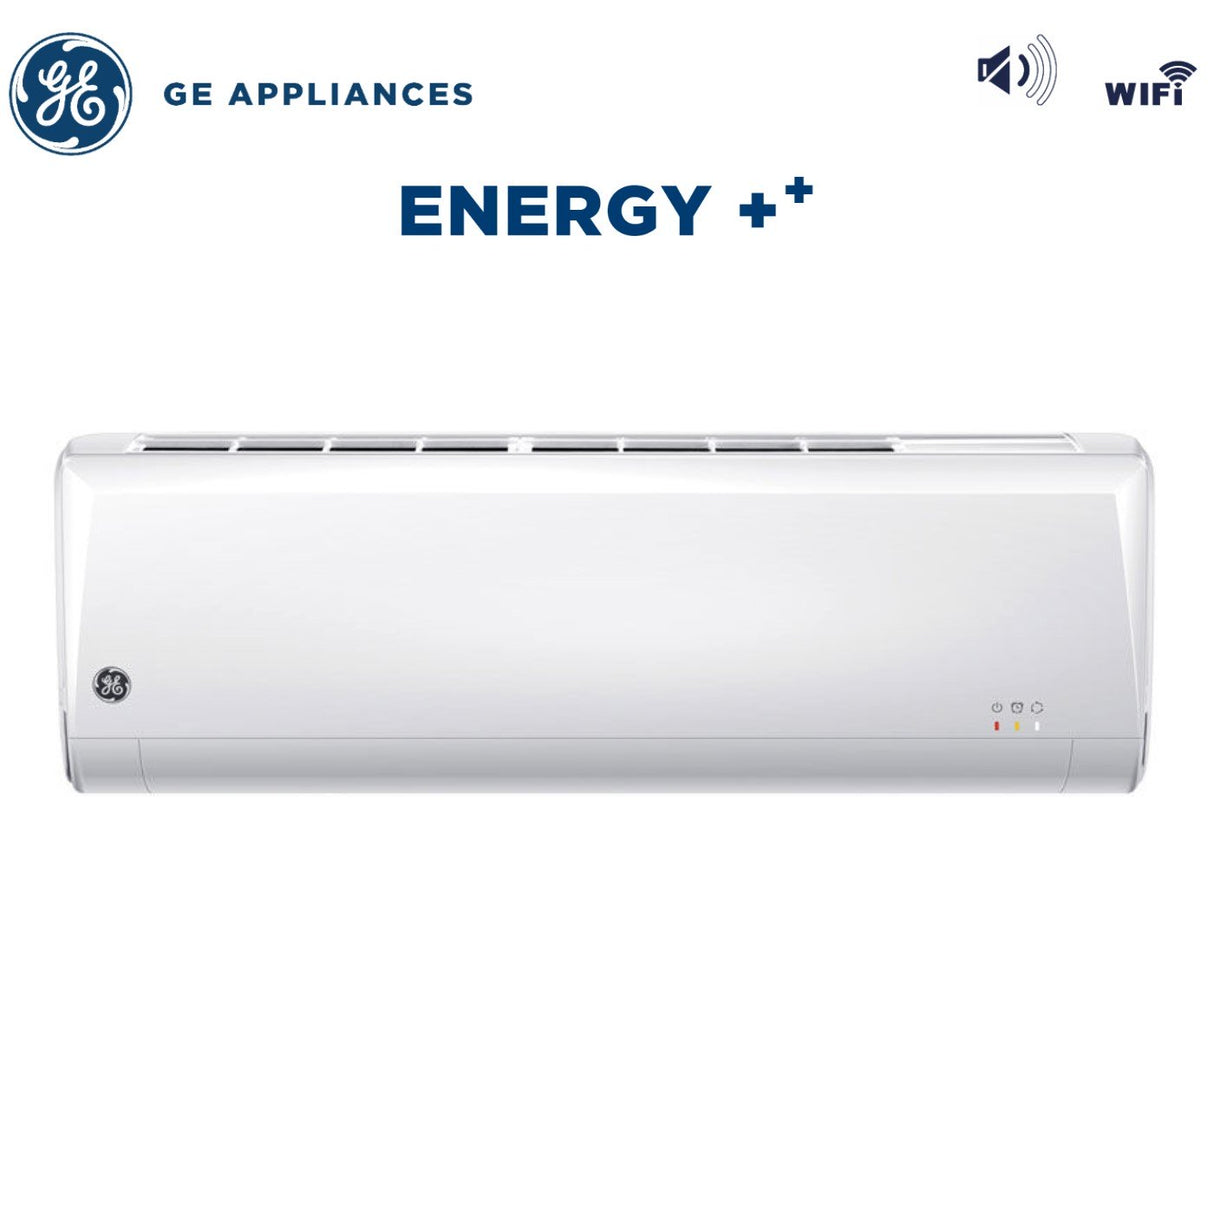 immagine-2-ge-appliances-climatizzatore-condizionatore-general-electric-ge-appliances-inverter-serie-energy-12000-btu-ges-nig25in-ges-nig35out-r-32-wi-fi-optional-classe-aa